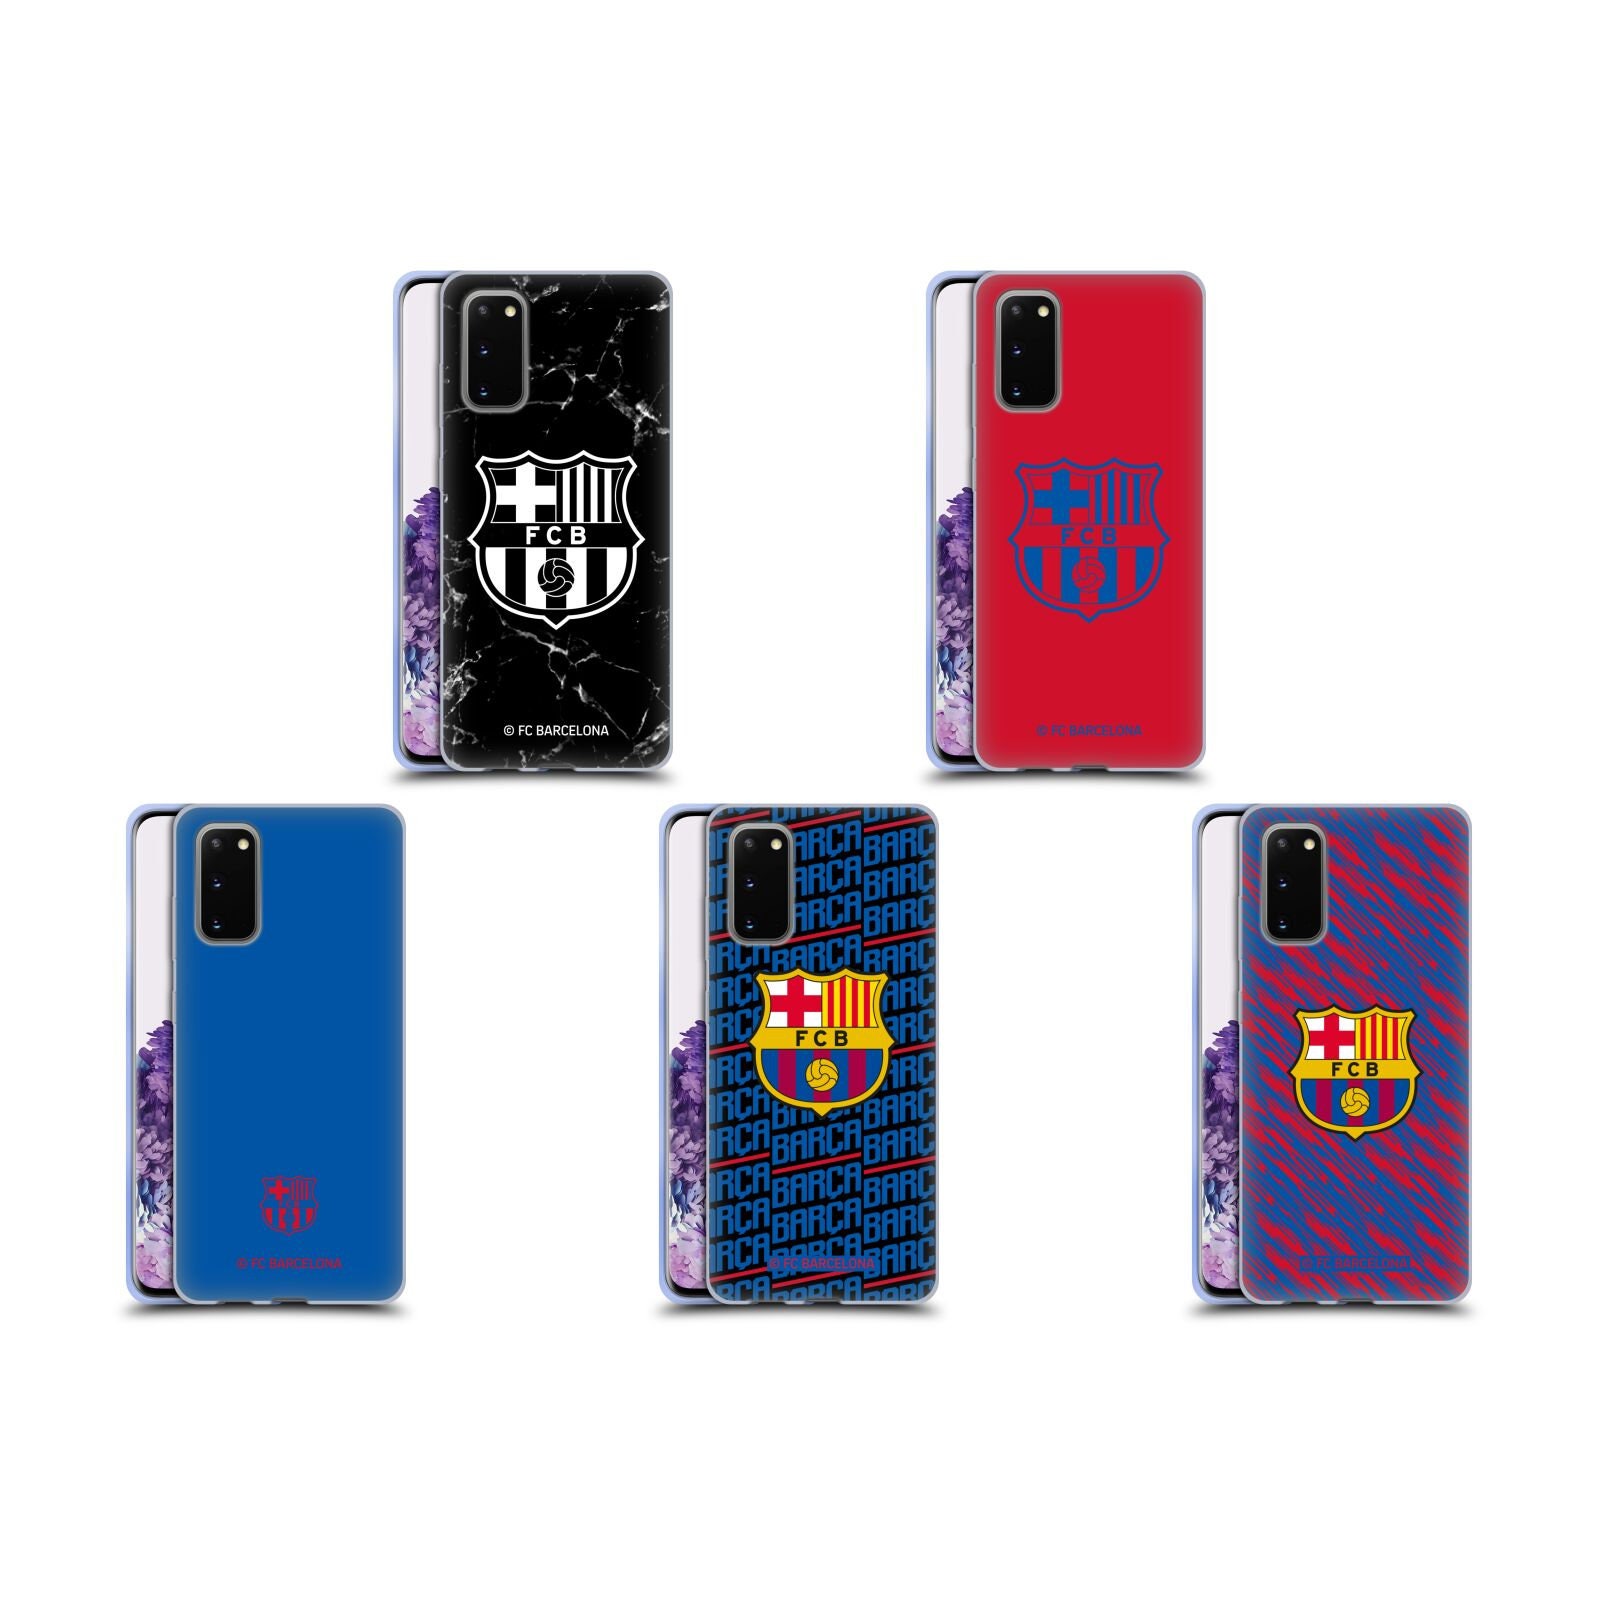 Head Case Designs Officially Licensed FC Barcelona Away Goalkeeper 2019/20 Crest Kit Hard Back Case Compatible With Apple iPhone 5 iPhone SE 2016 iPhone 5s 